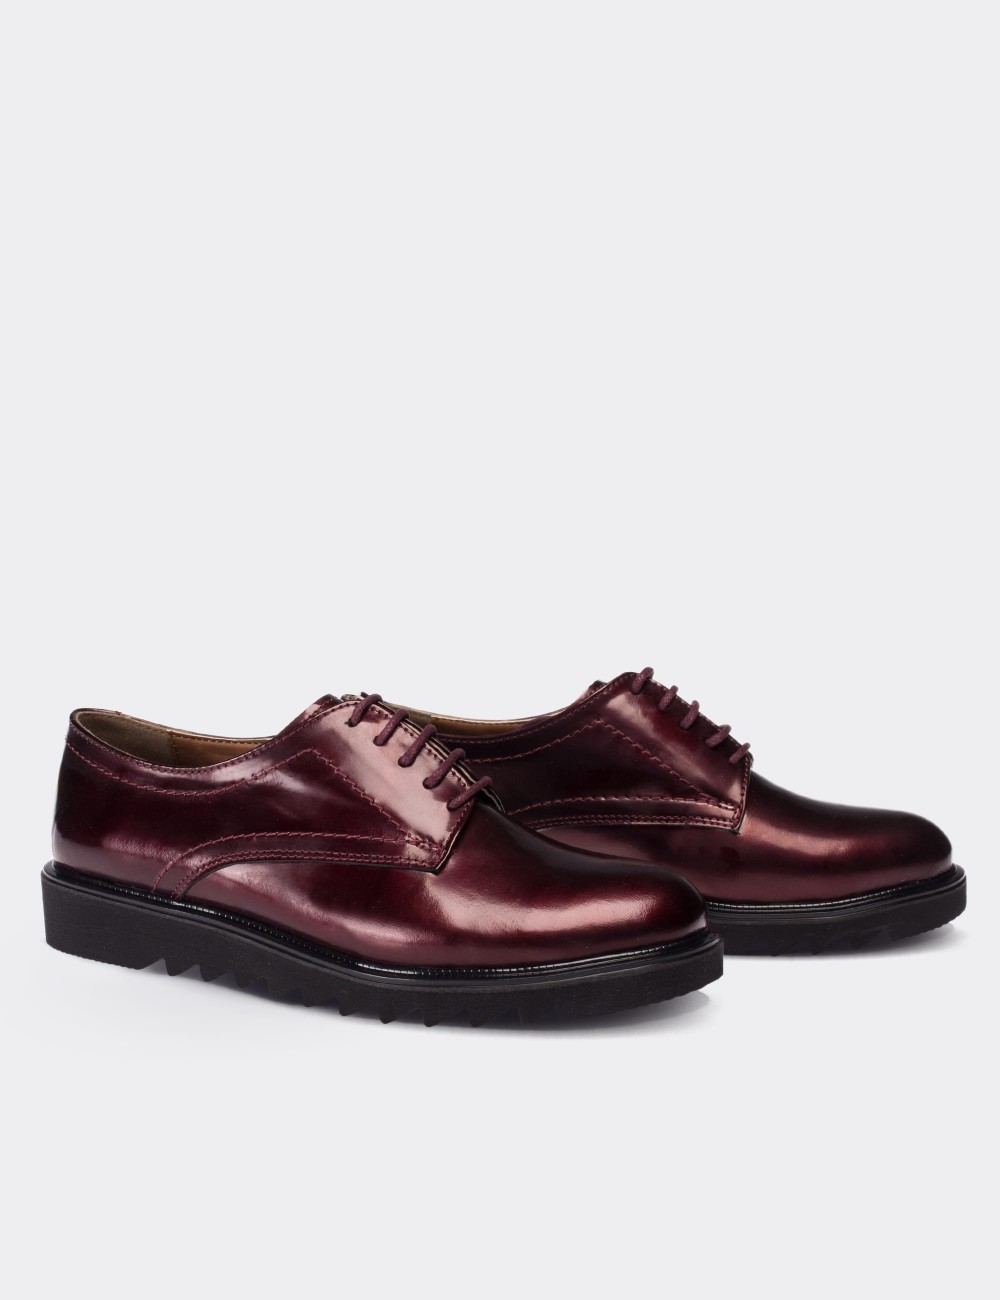 Purple Patent Leather Lace-up Oxford Shoes - 01430ZMORE06